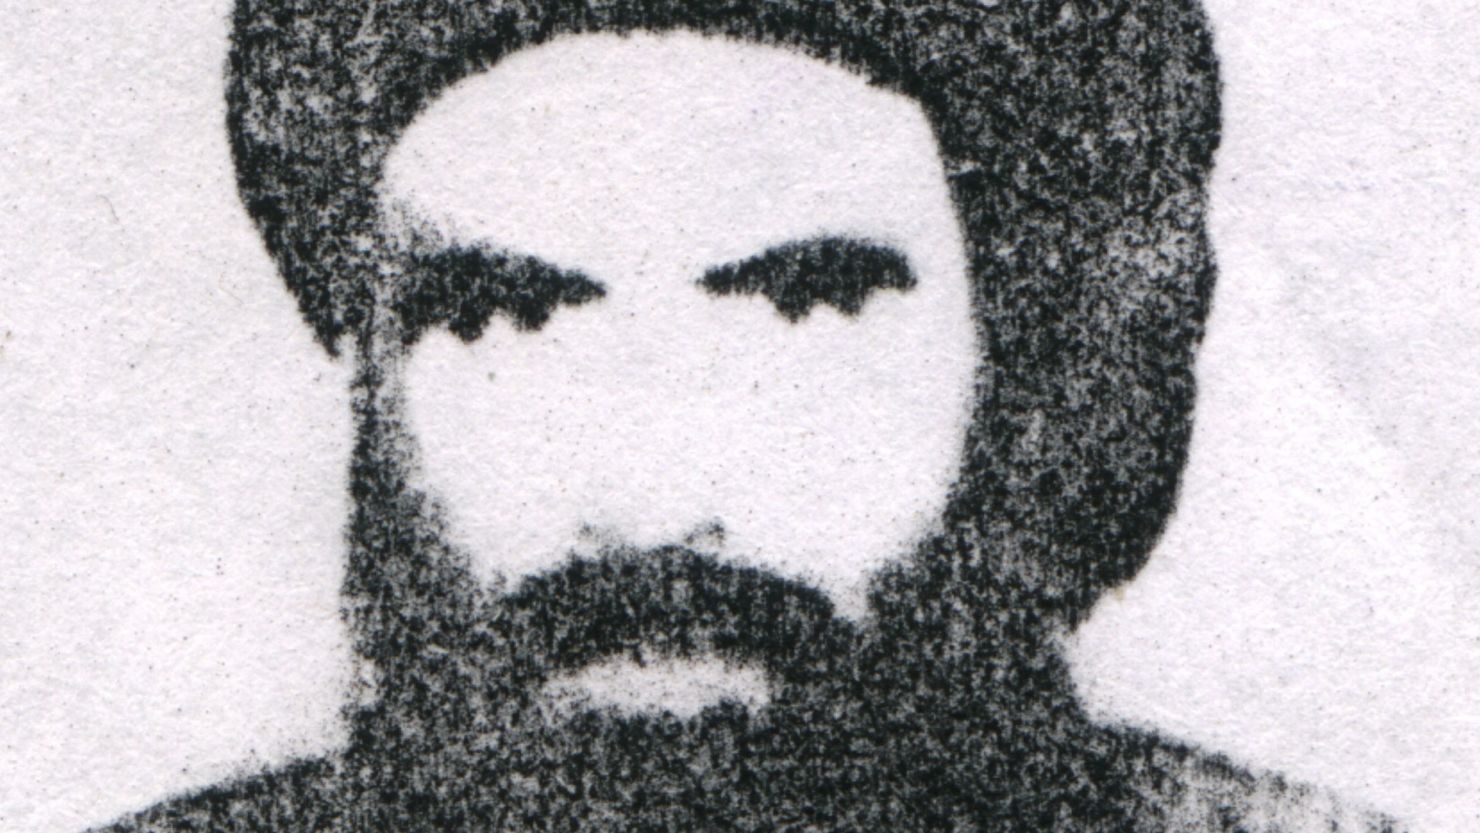 Mullah Omar, chief of the Taliban in Afghanistan, is shown in an undated photo.